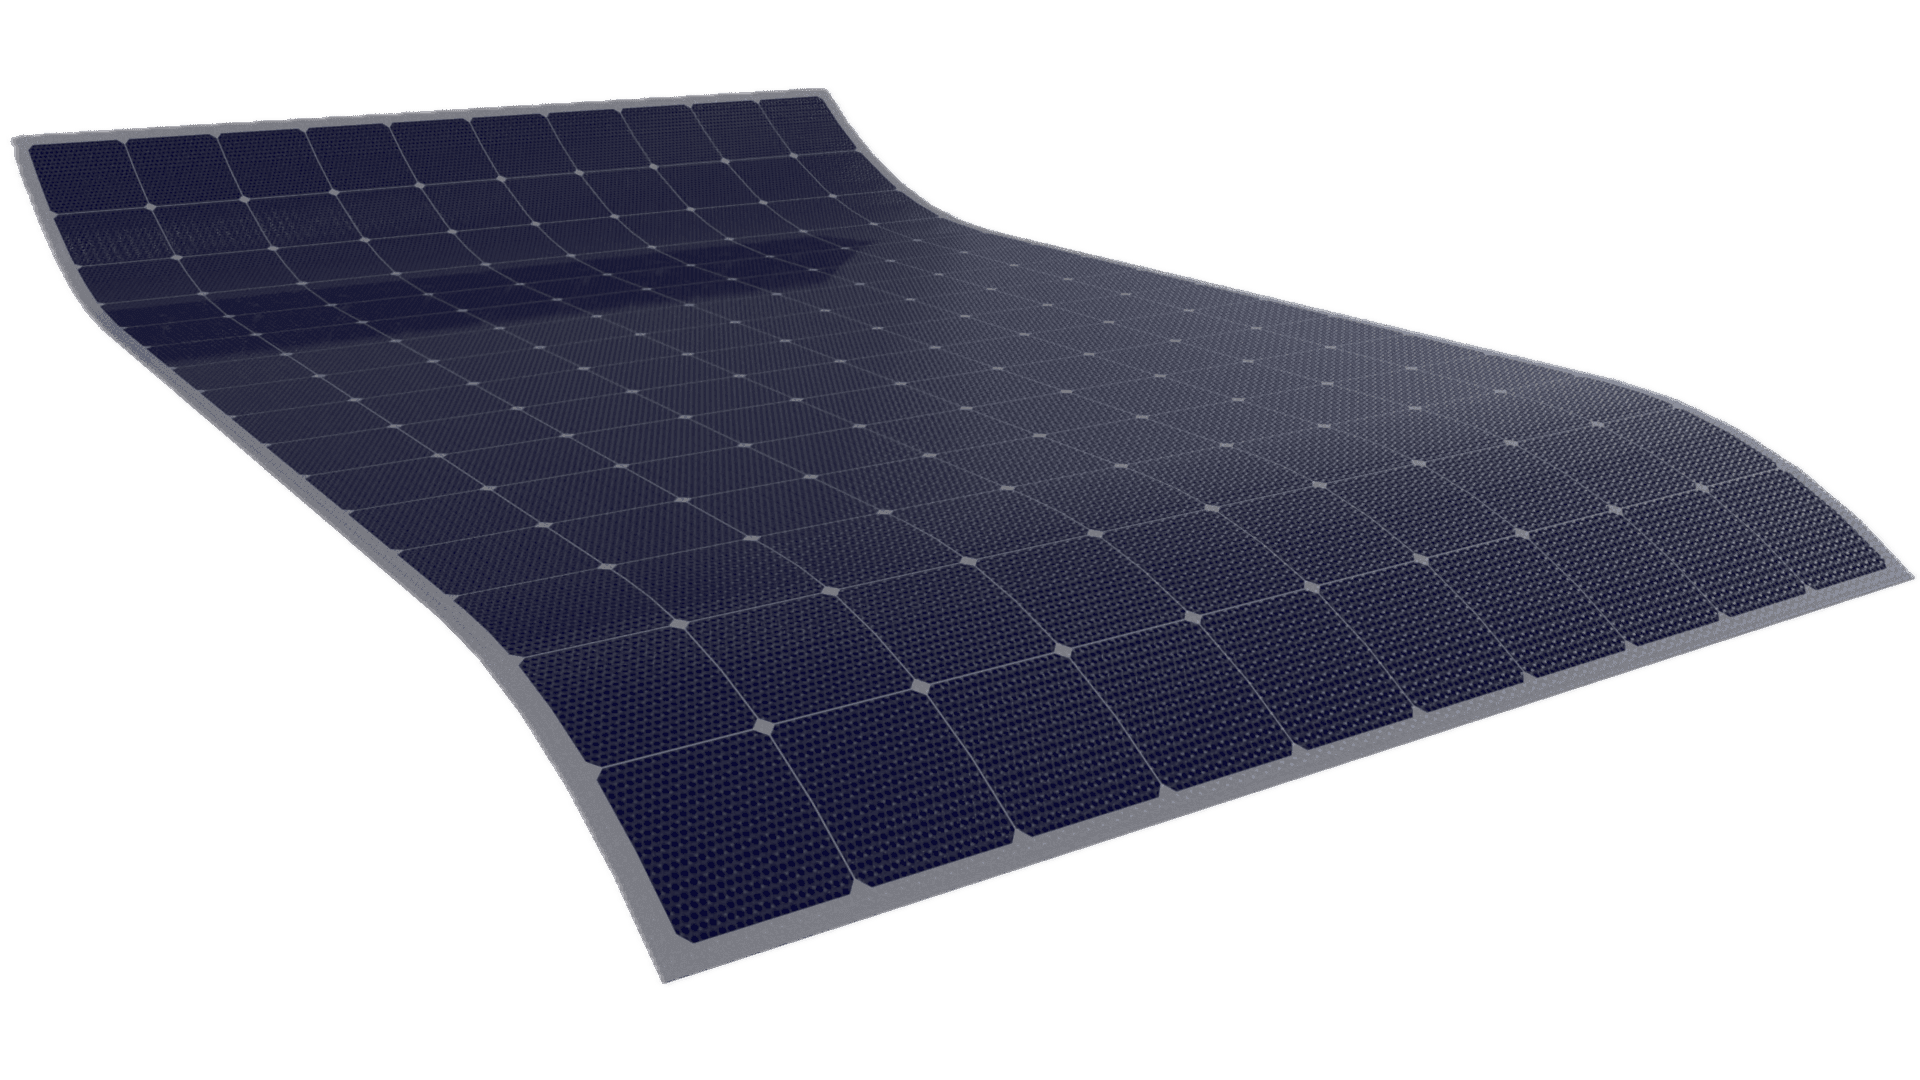 3D illustration of a large solar panel to demonstrate flexibility.